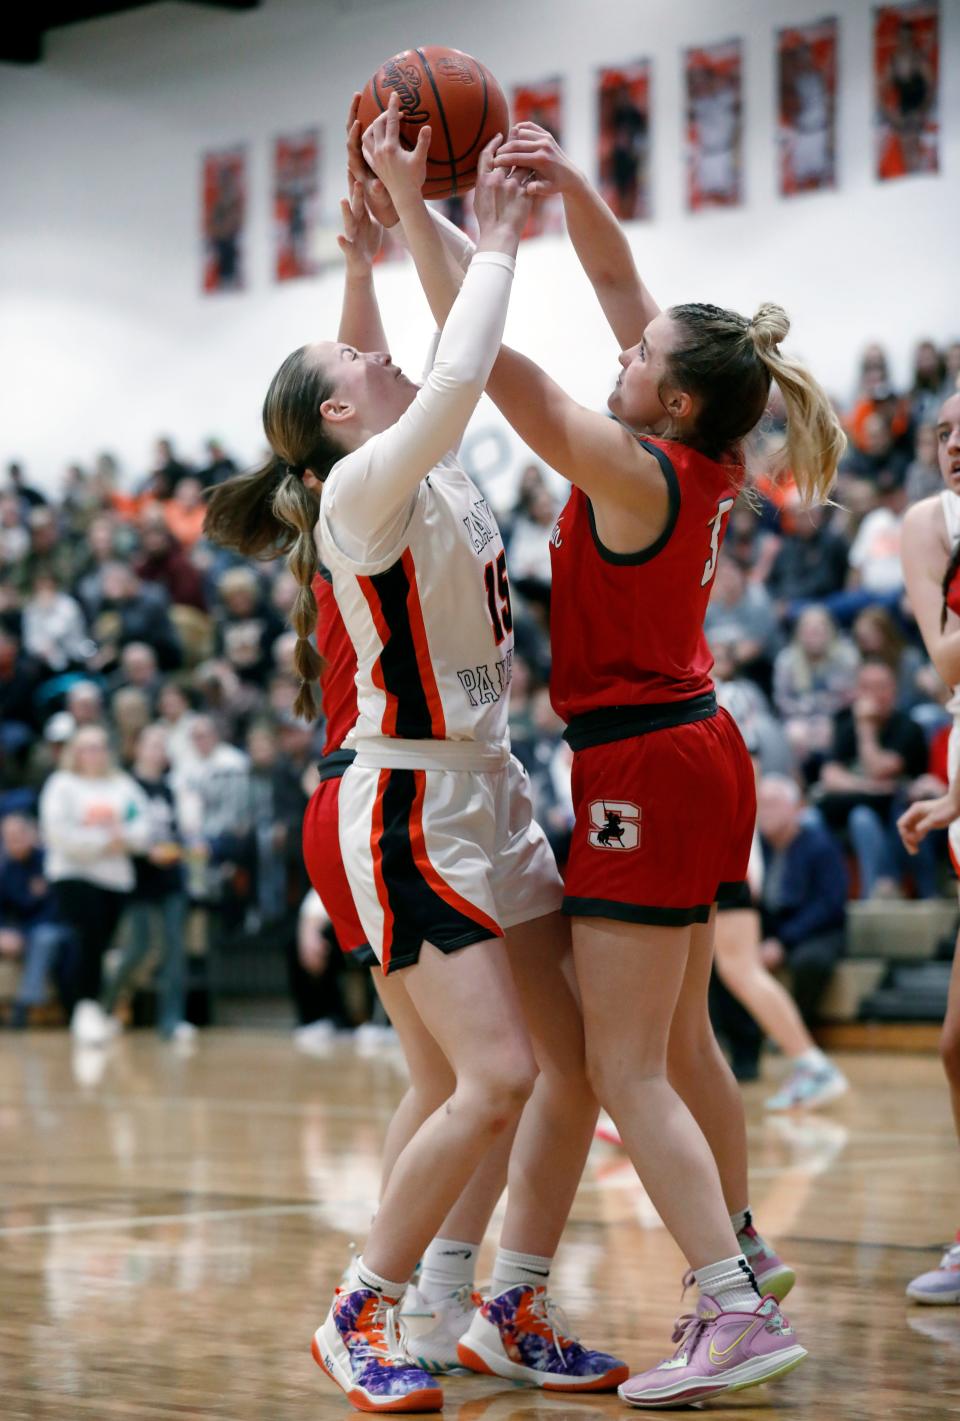 New Lexington's Chloe Dick, left, fights for a rebound with Sheridan's Ava Heller during the third quarter on Wednesday night  in New Lex. Sheridan won, 56-50, despite Dick's team-high 15 points.